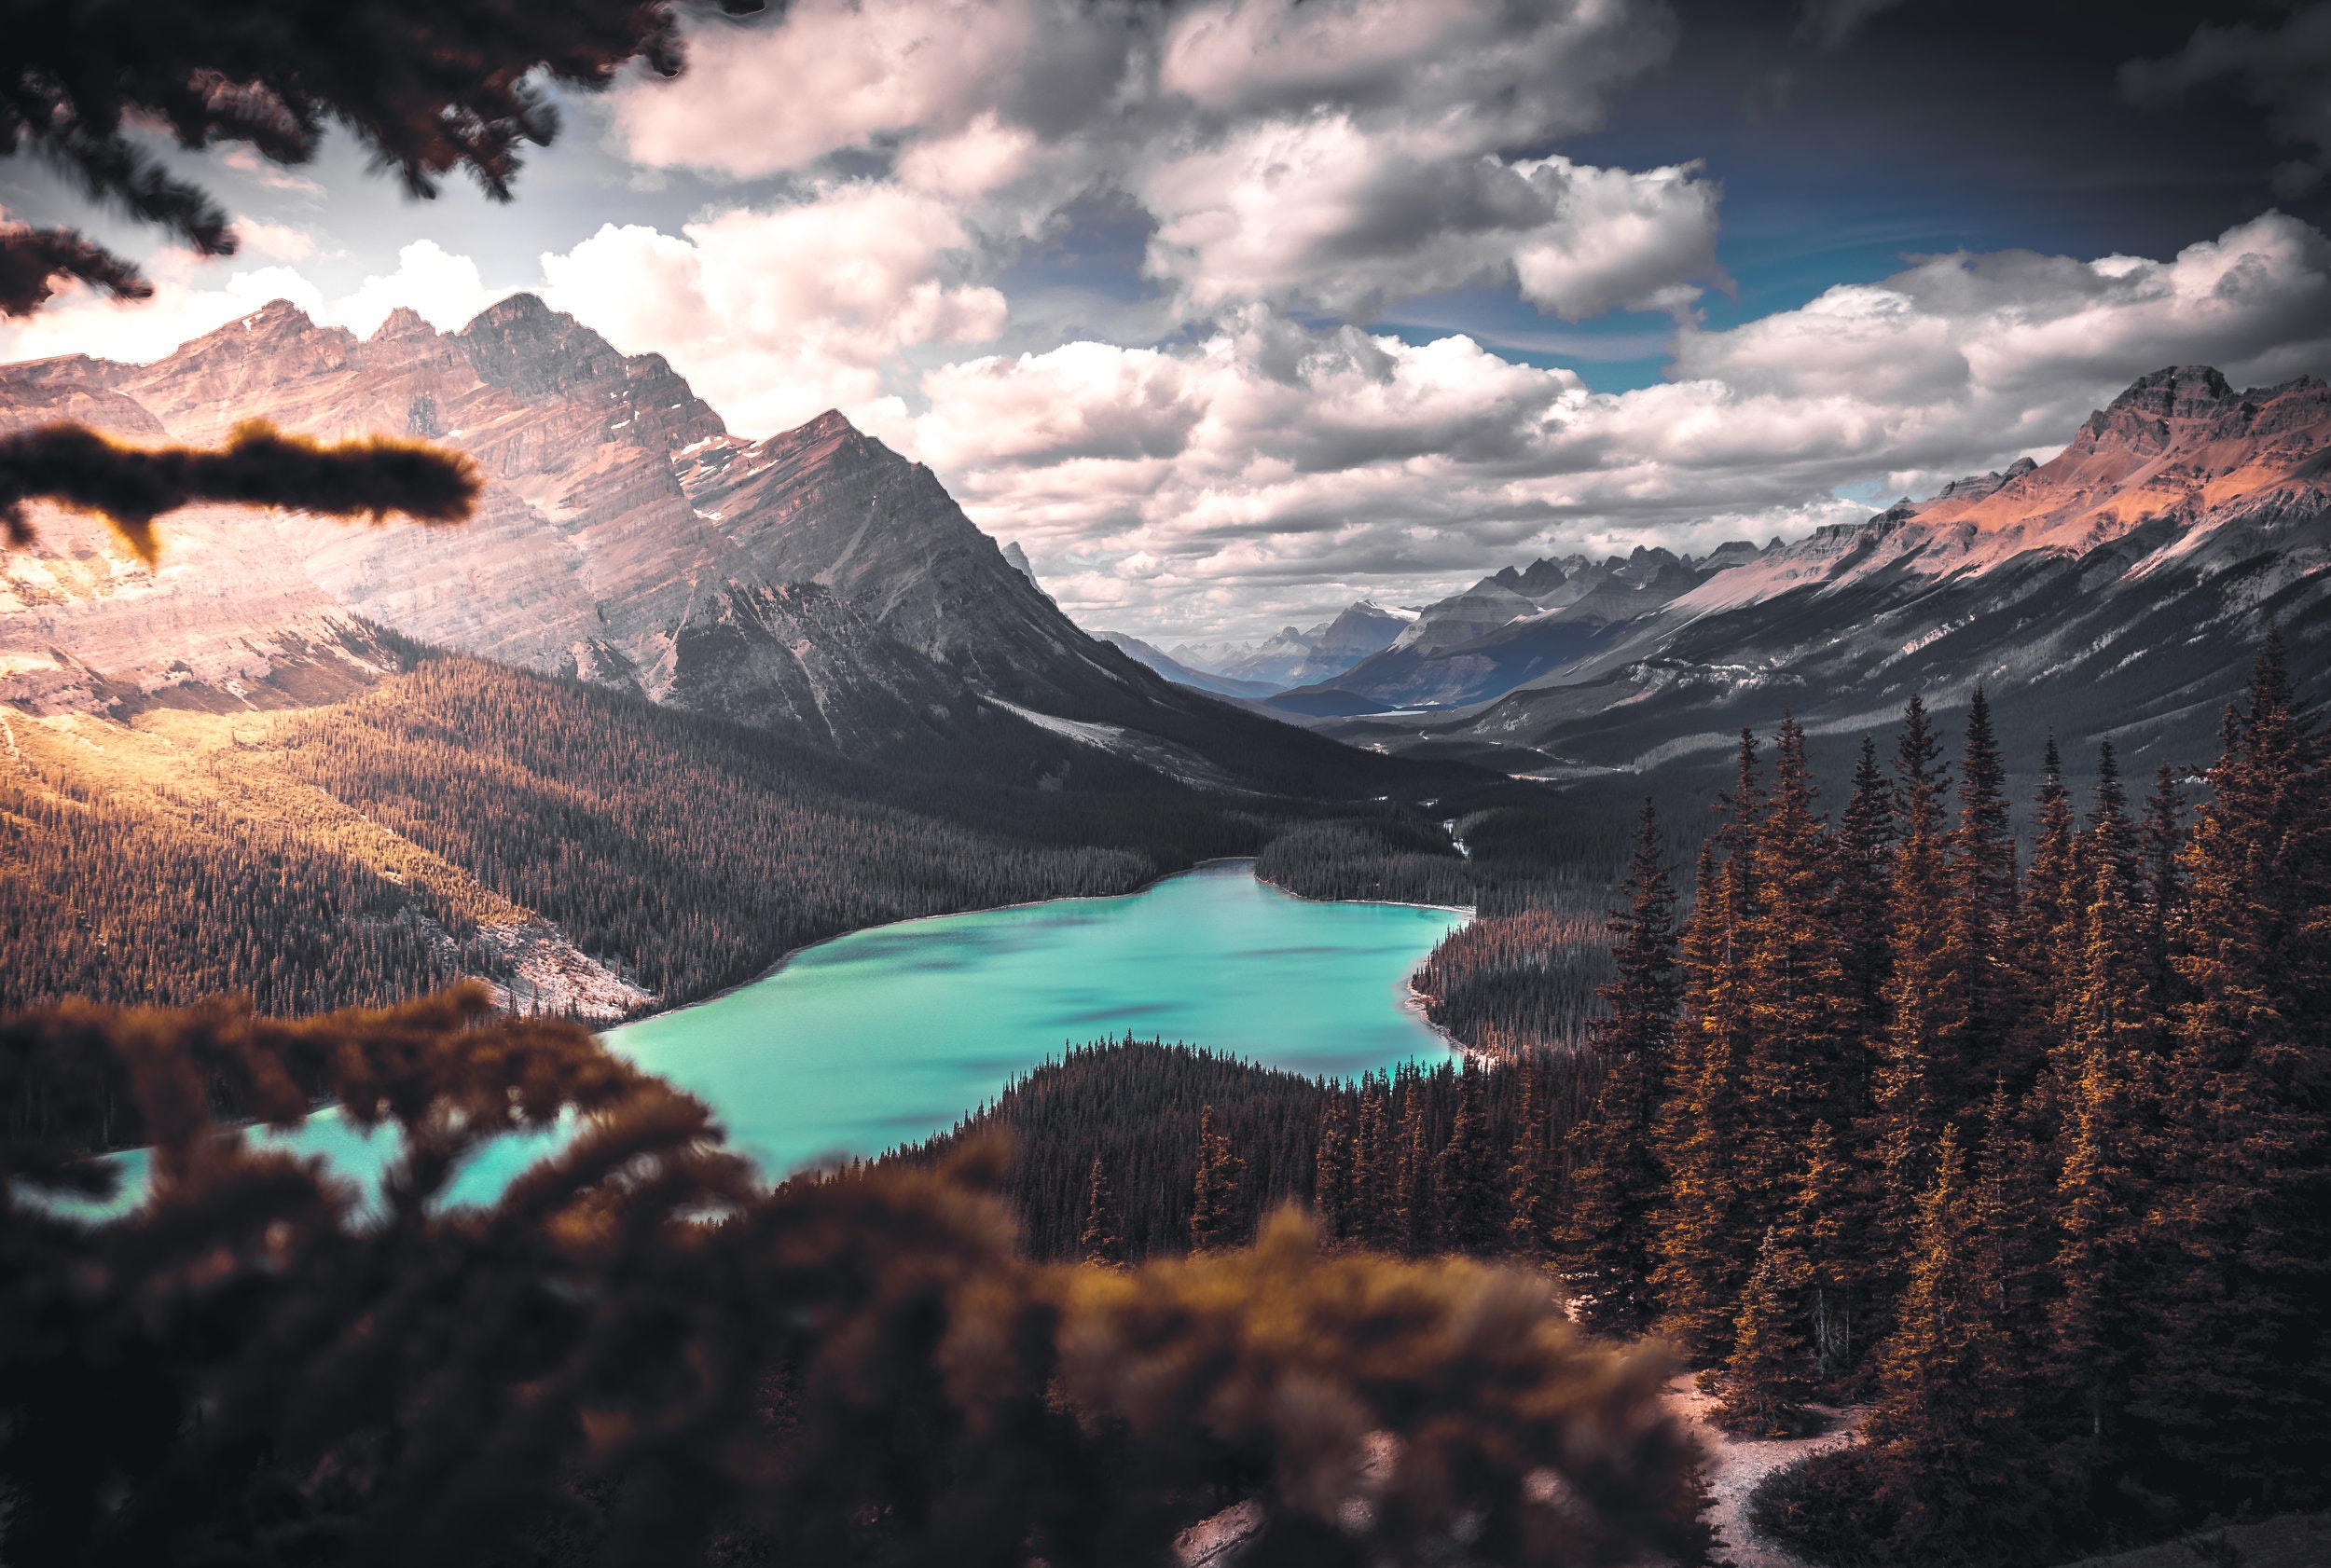 General 2500x1682 landscape mountains sky forest trees lake Peyto Lake Banff National Park Canada